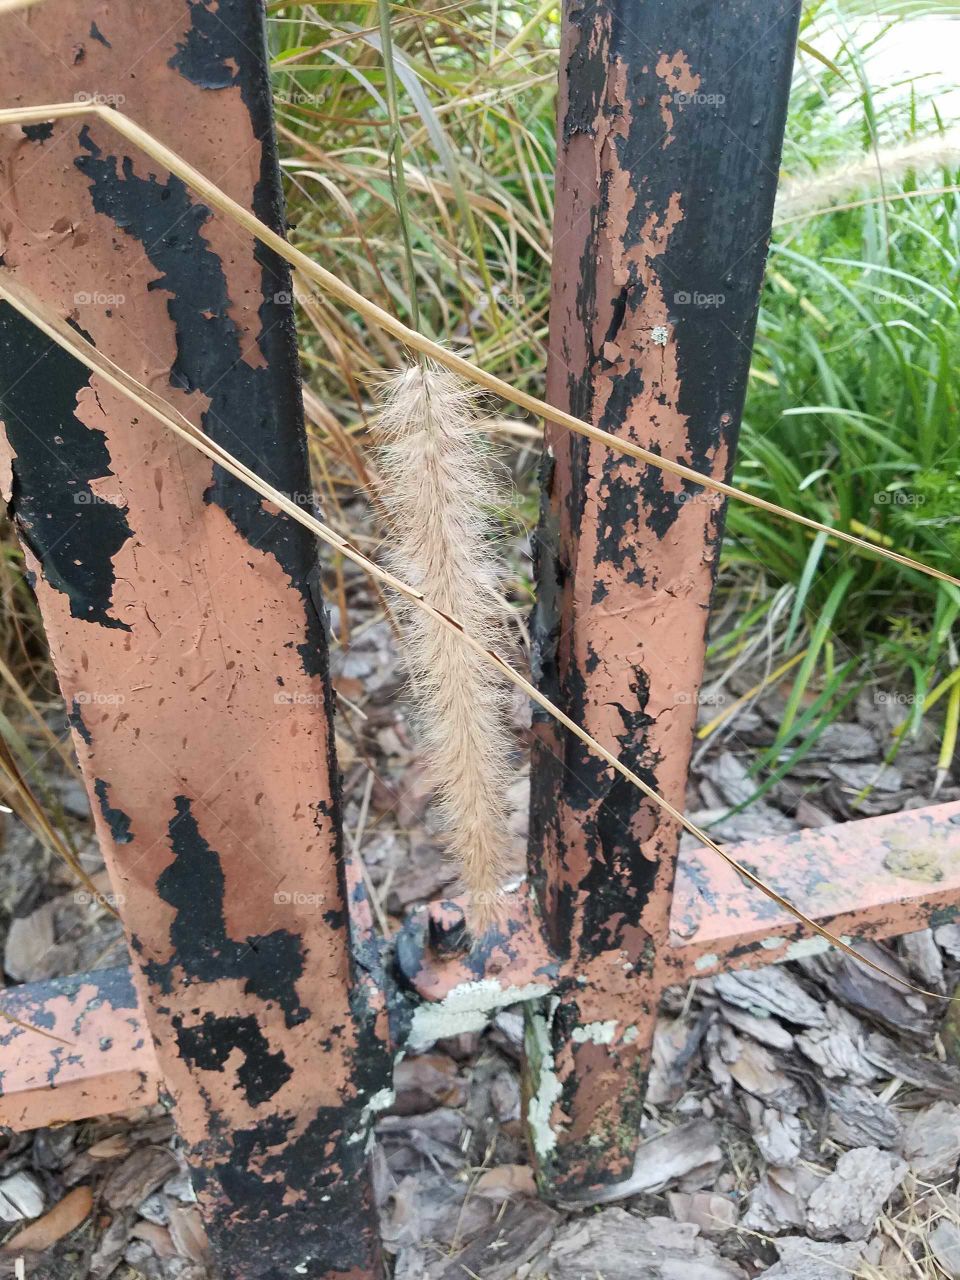 Rusted metal fence posts close up with grass in background